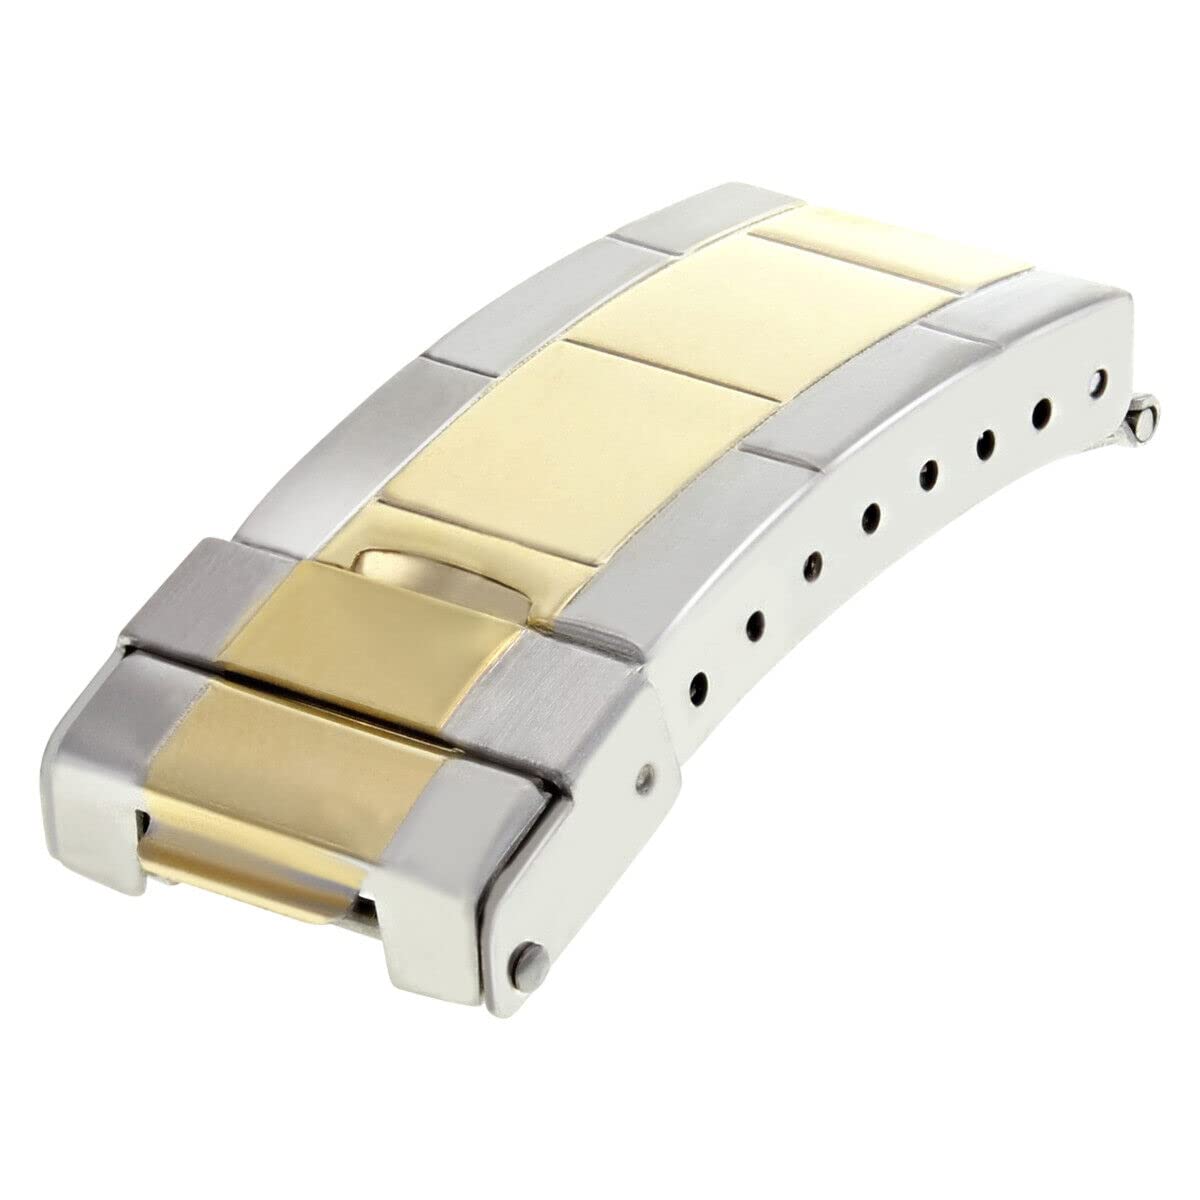 Ewatchparts FLIP LOCK BUCKLE CLASP DIVER EXTENSION FOR ROLEX GMT OYSTER WATCH BAND TWO TONE